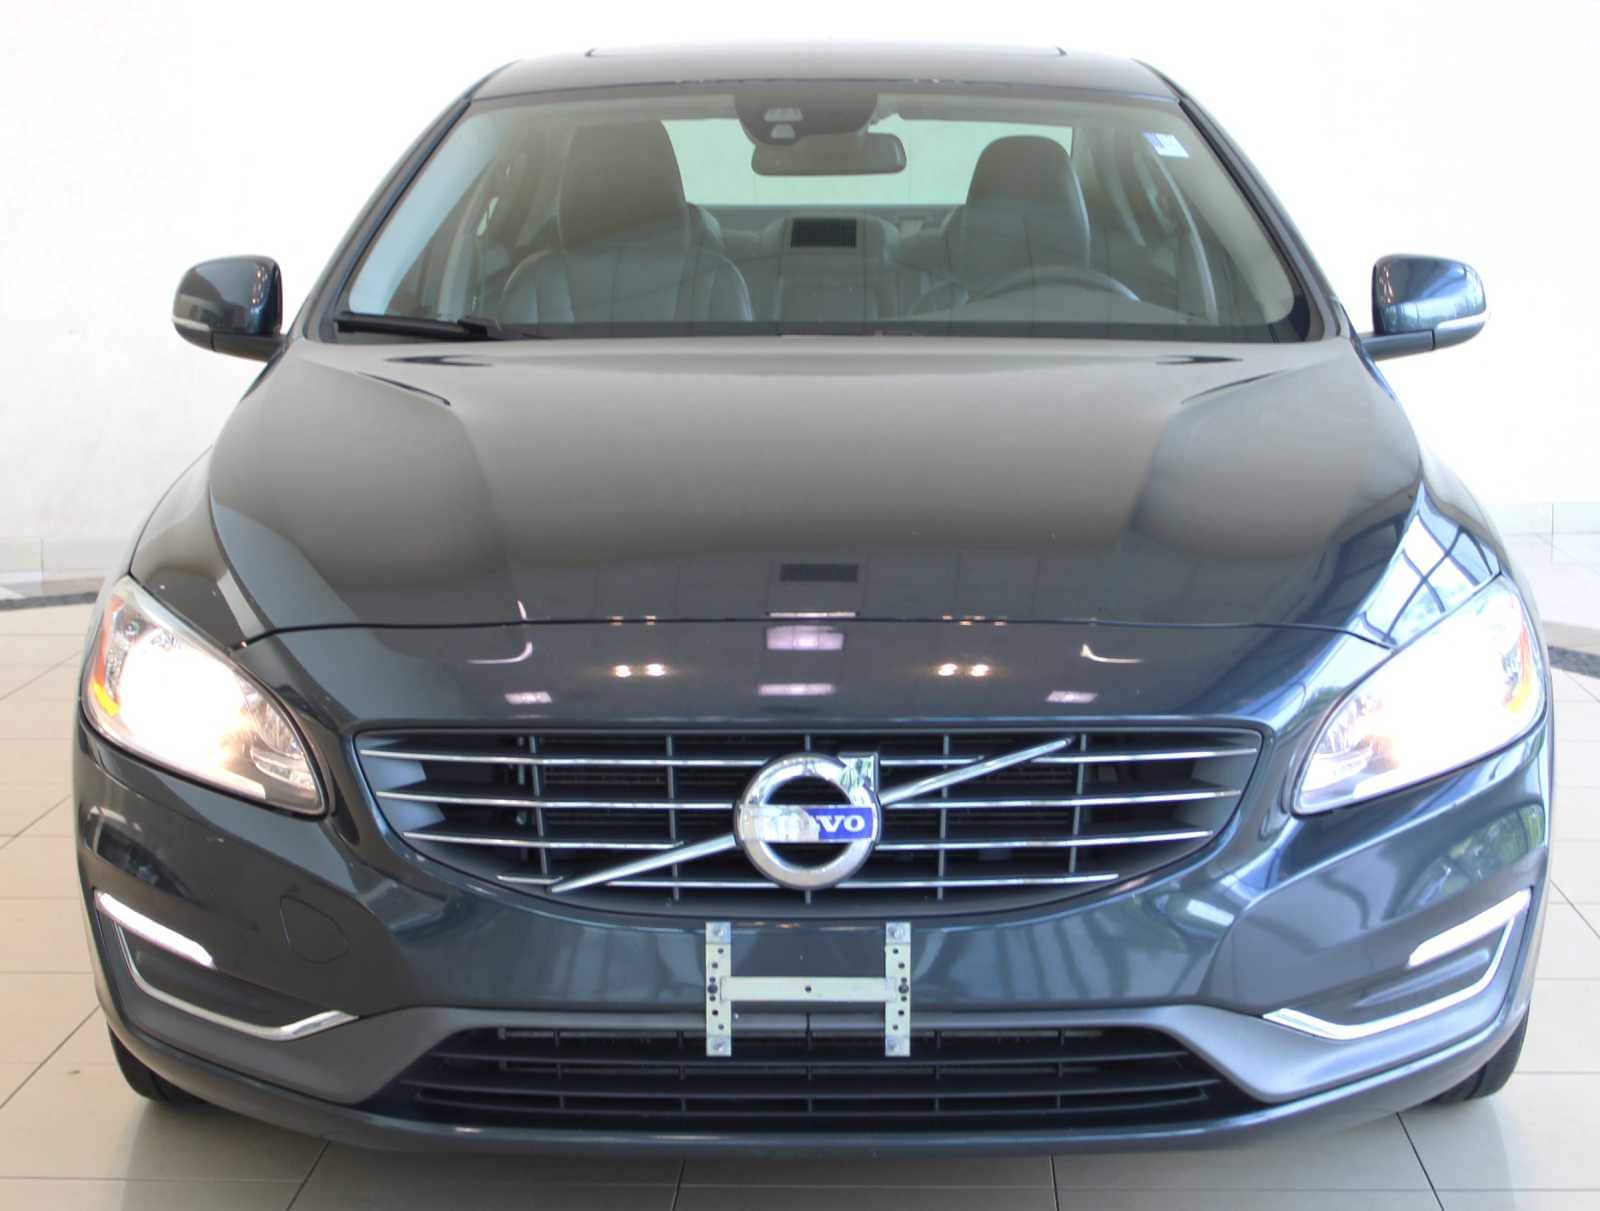 Used 2014 Volvo S60 T5 Platinum with VIN YV1612FHXE2284758 for sale in Sharon, MA